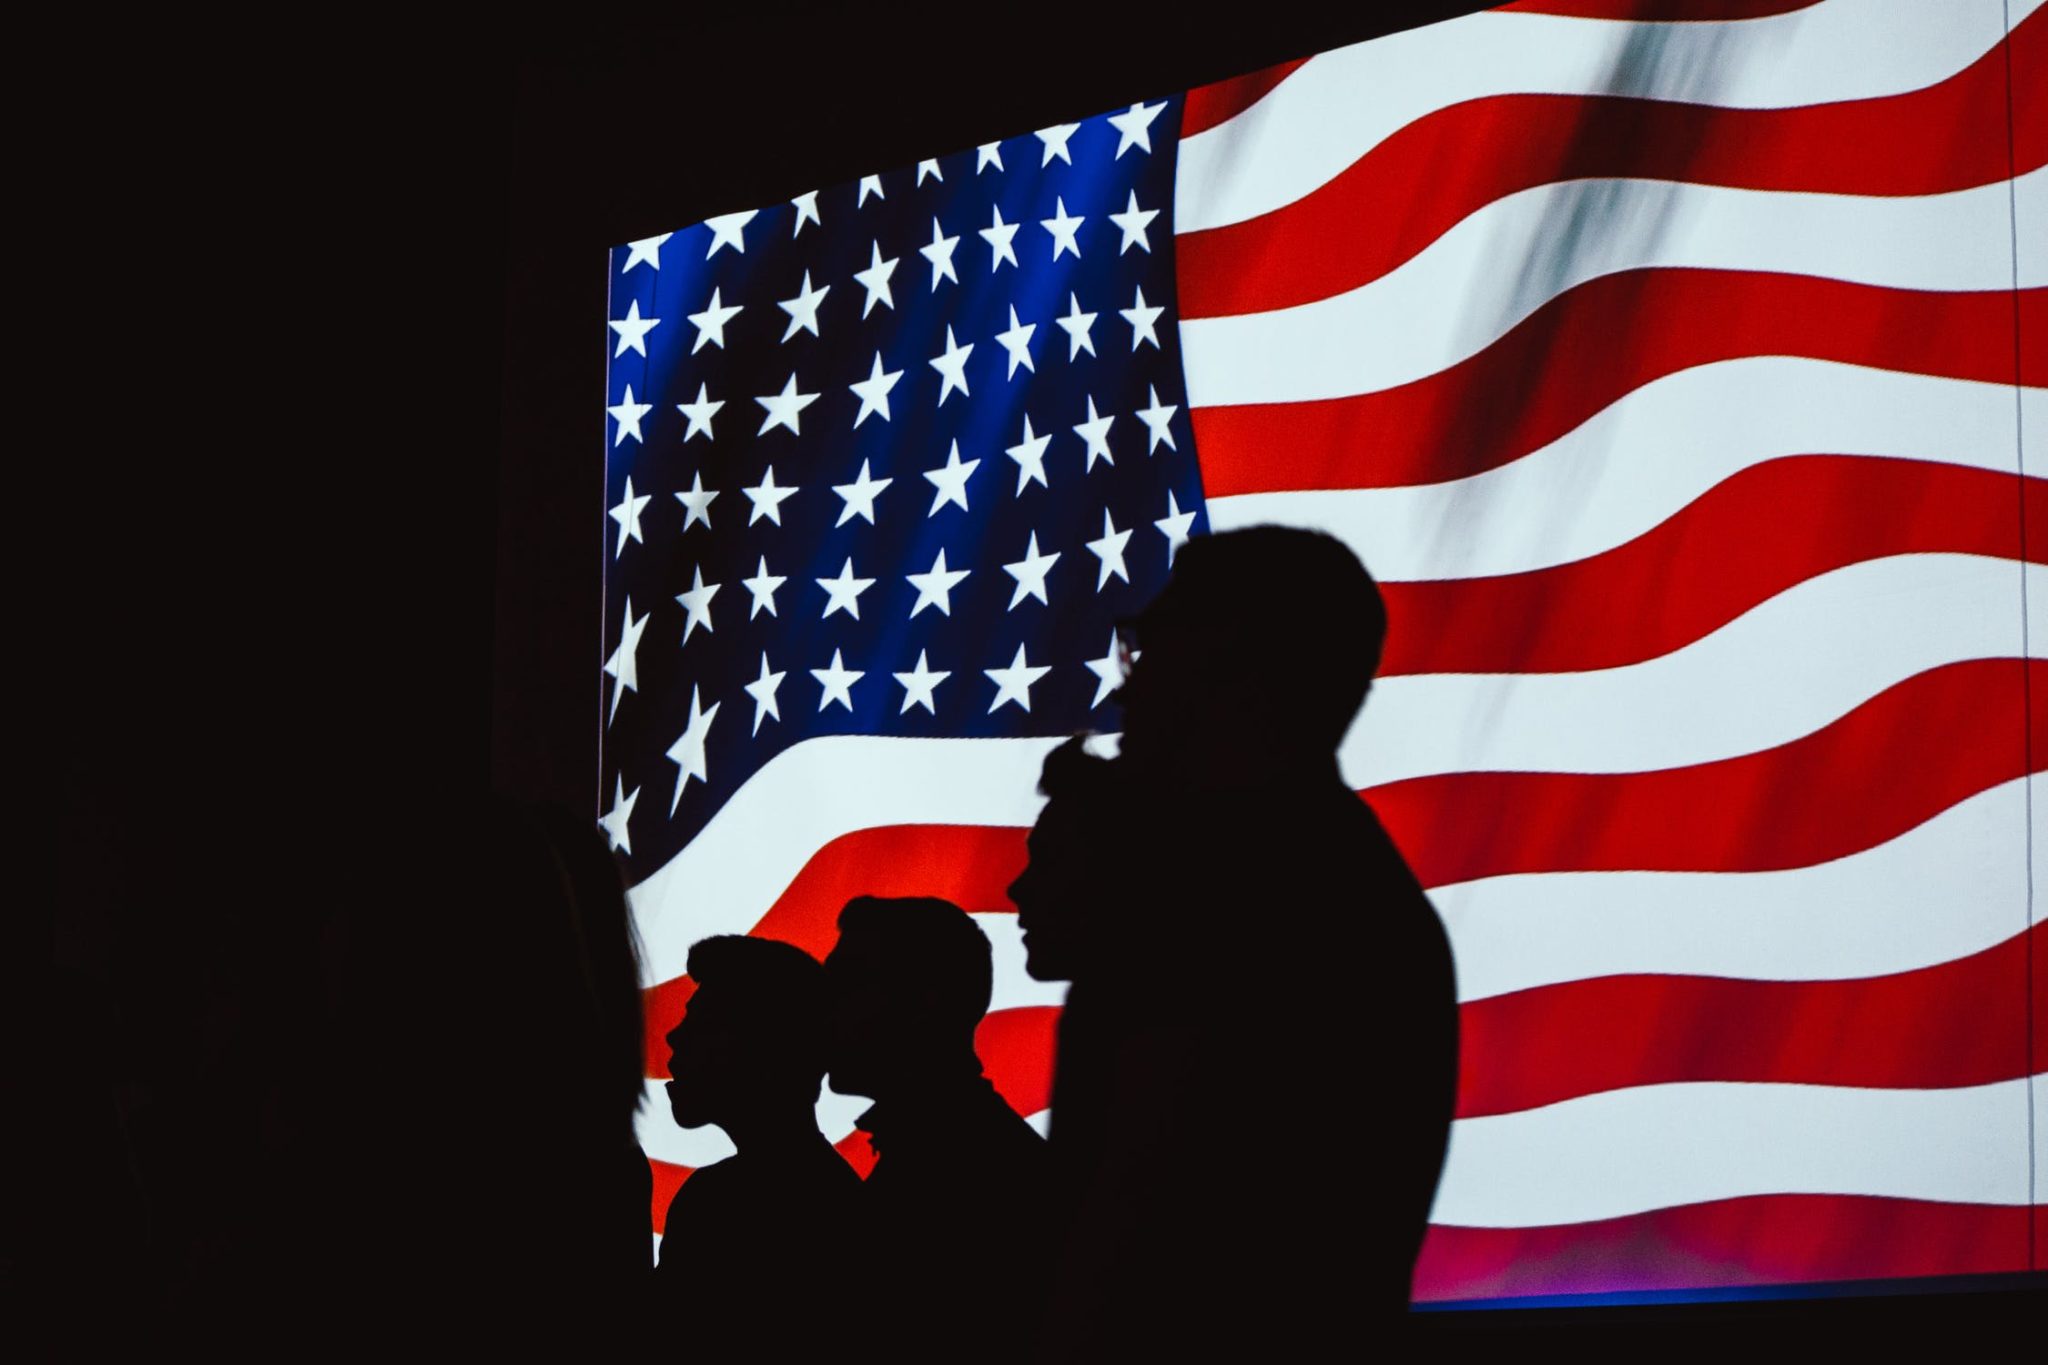 Photo of American flag with silhouettes of people standing in front of it.